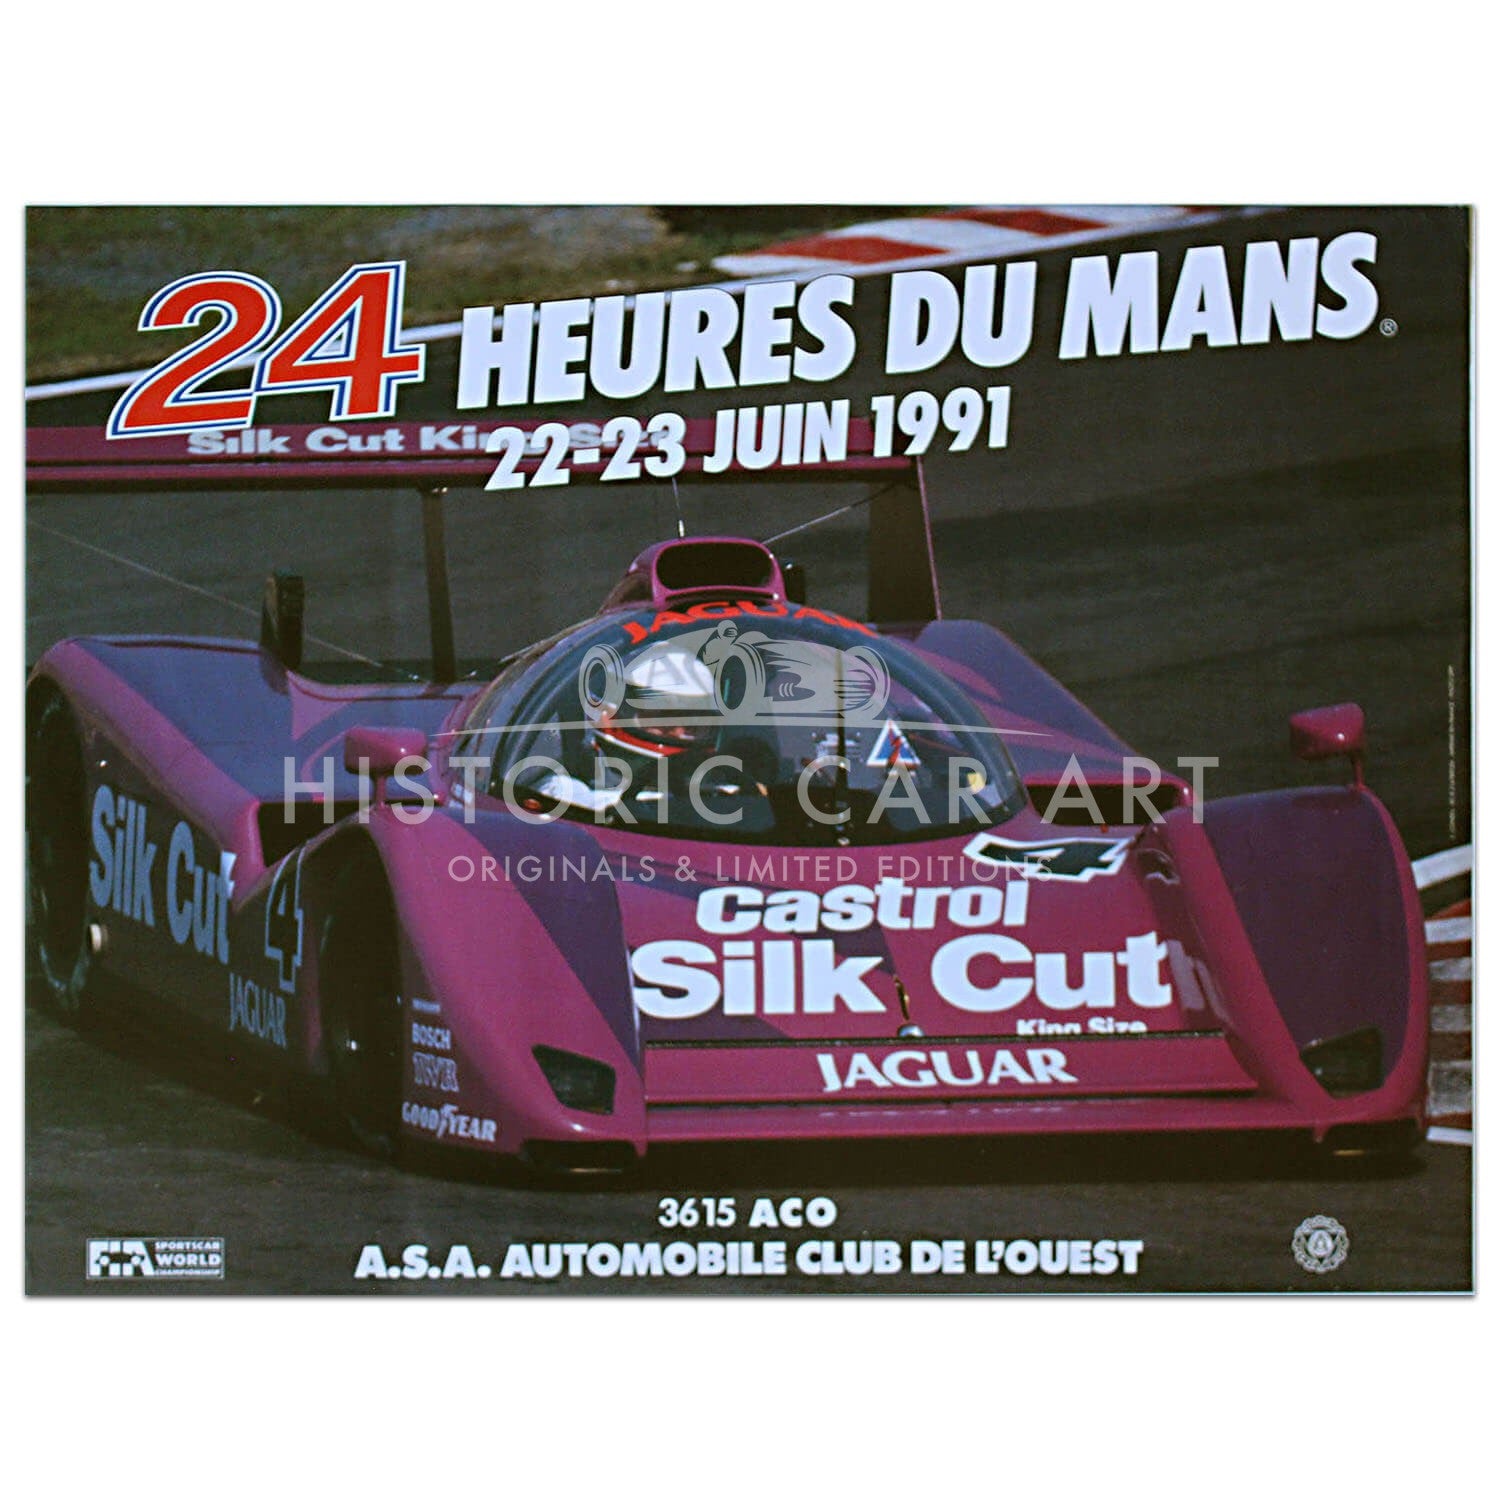 French | Le Mans 24 hours 1991 Original Poster